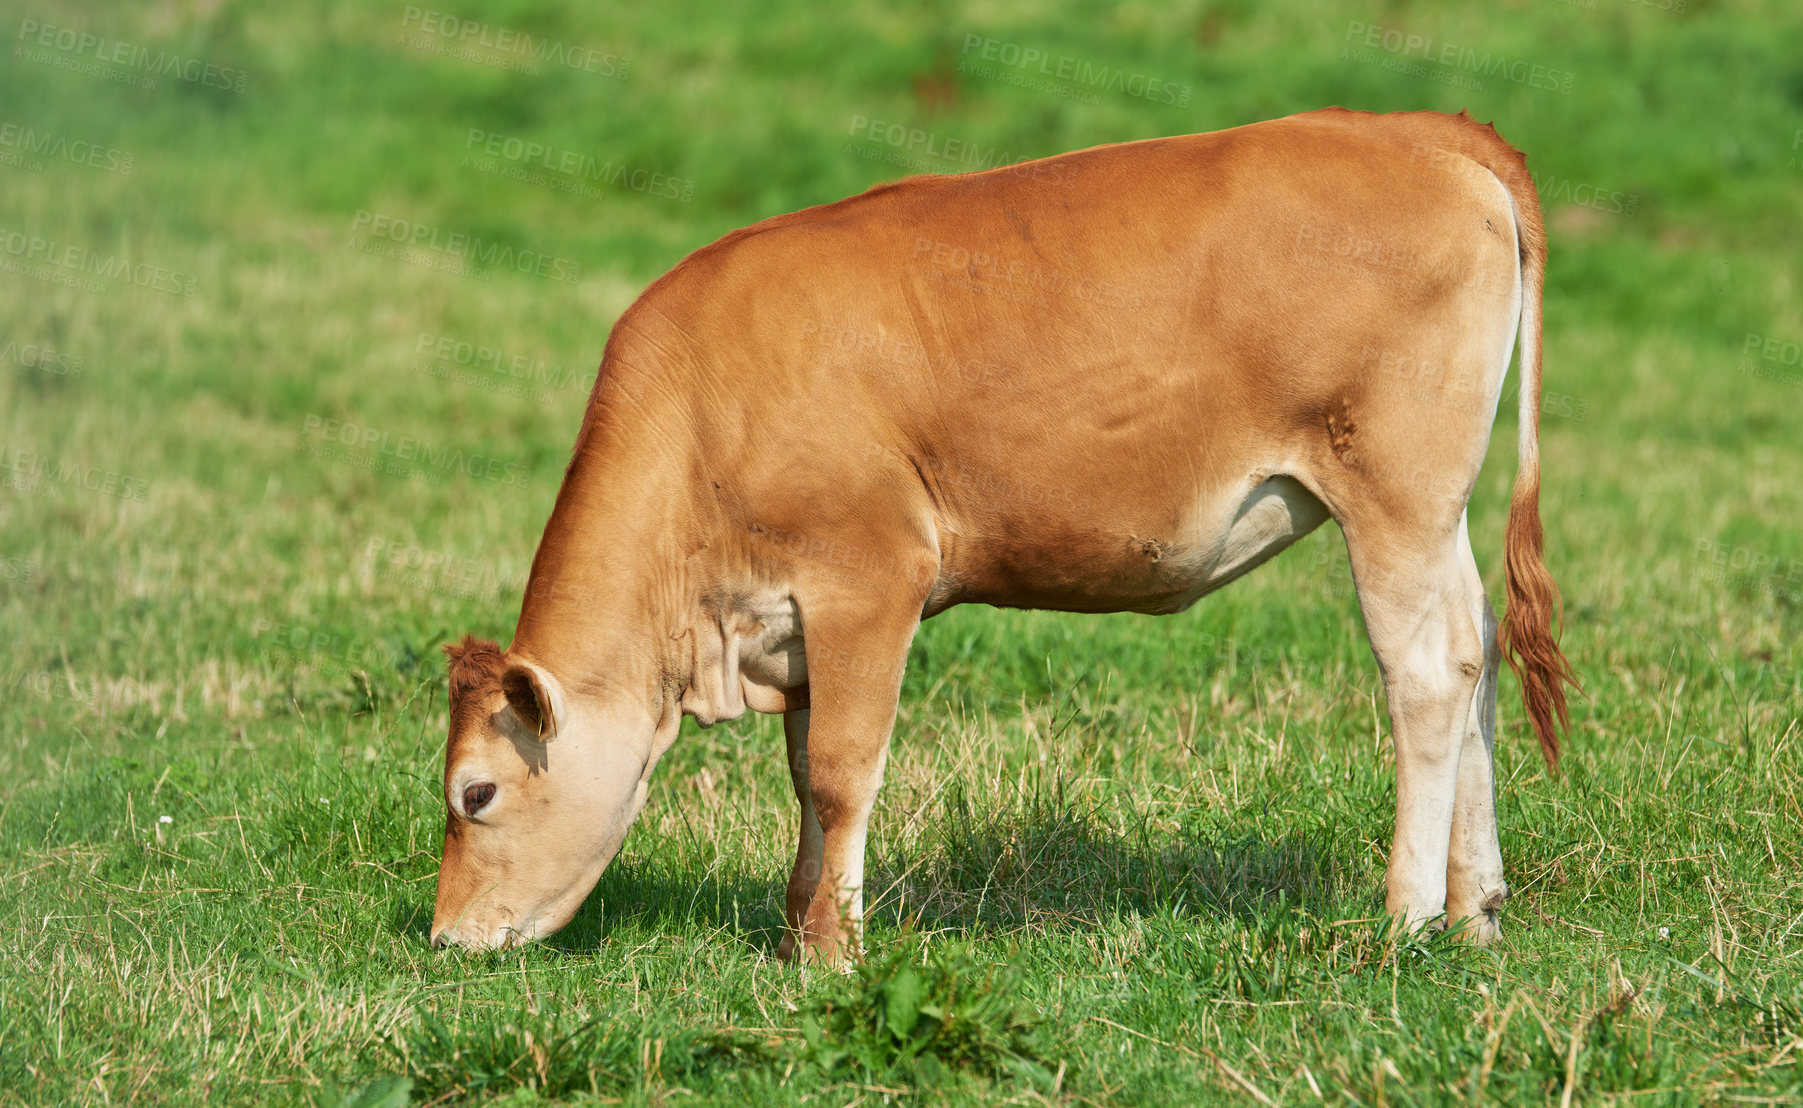 Buy stock photo Brown calf eating and grazing on green farmland in the countryside. Cow or livestock standing on an open, empty and secluded lush grassy field or meadow. Animal in its natural pasture or environment